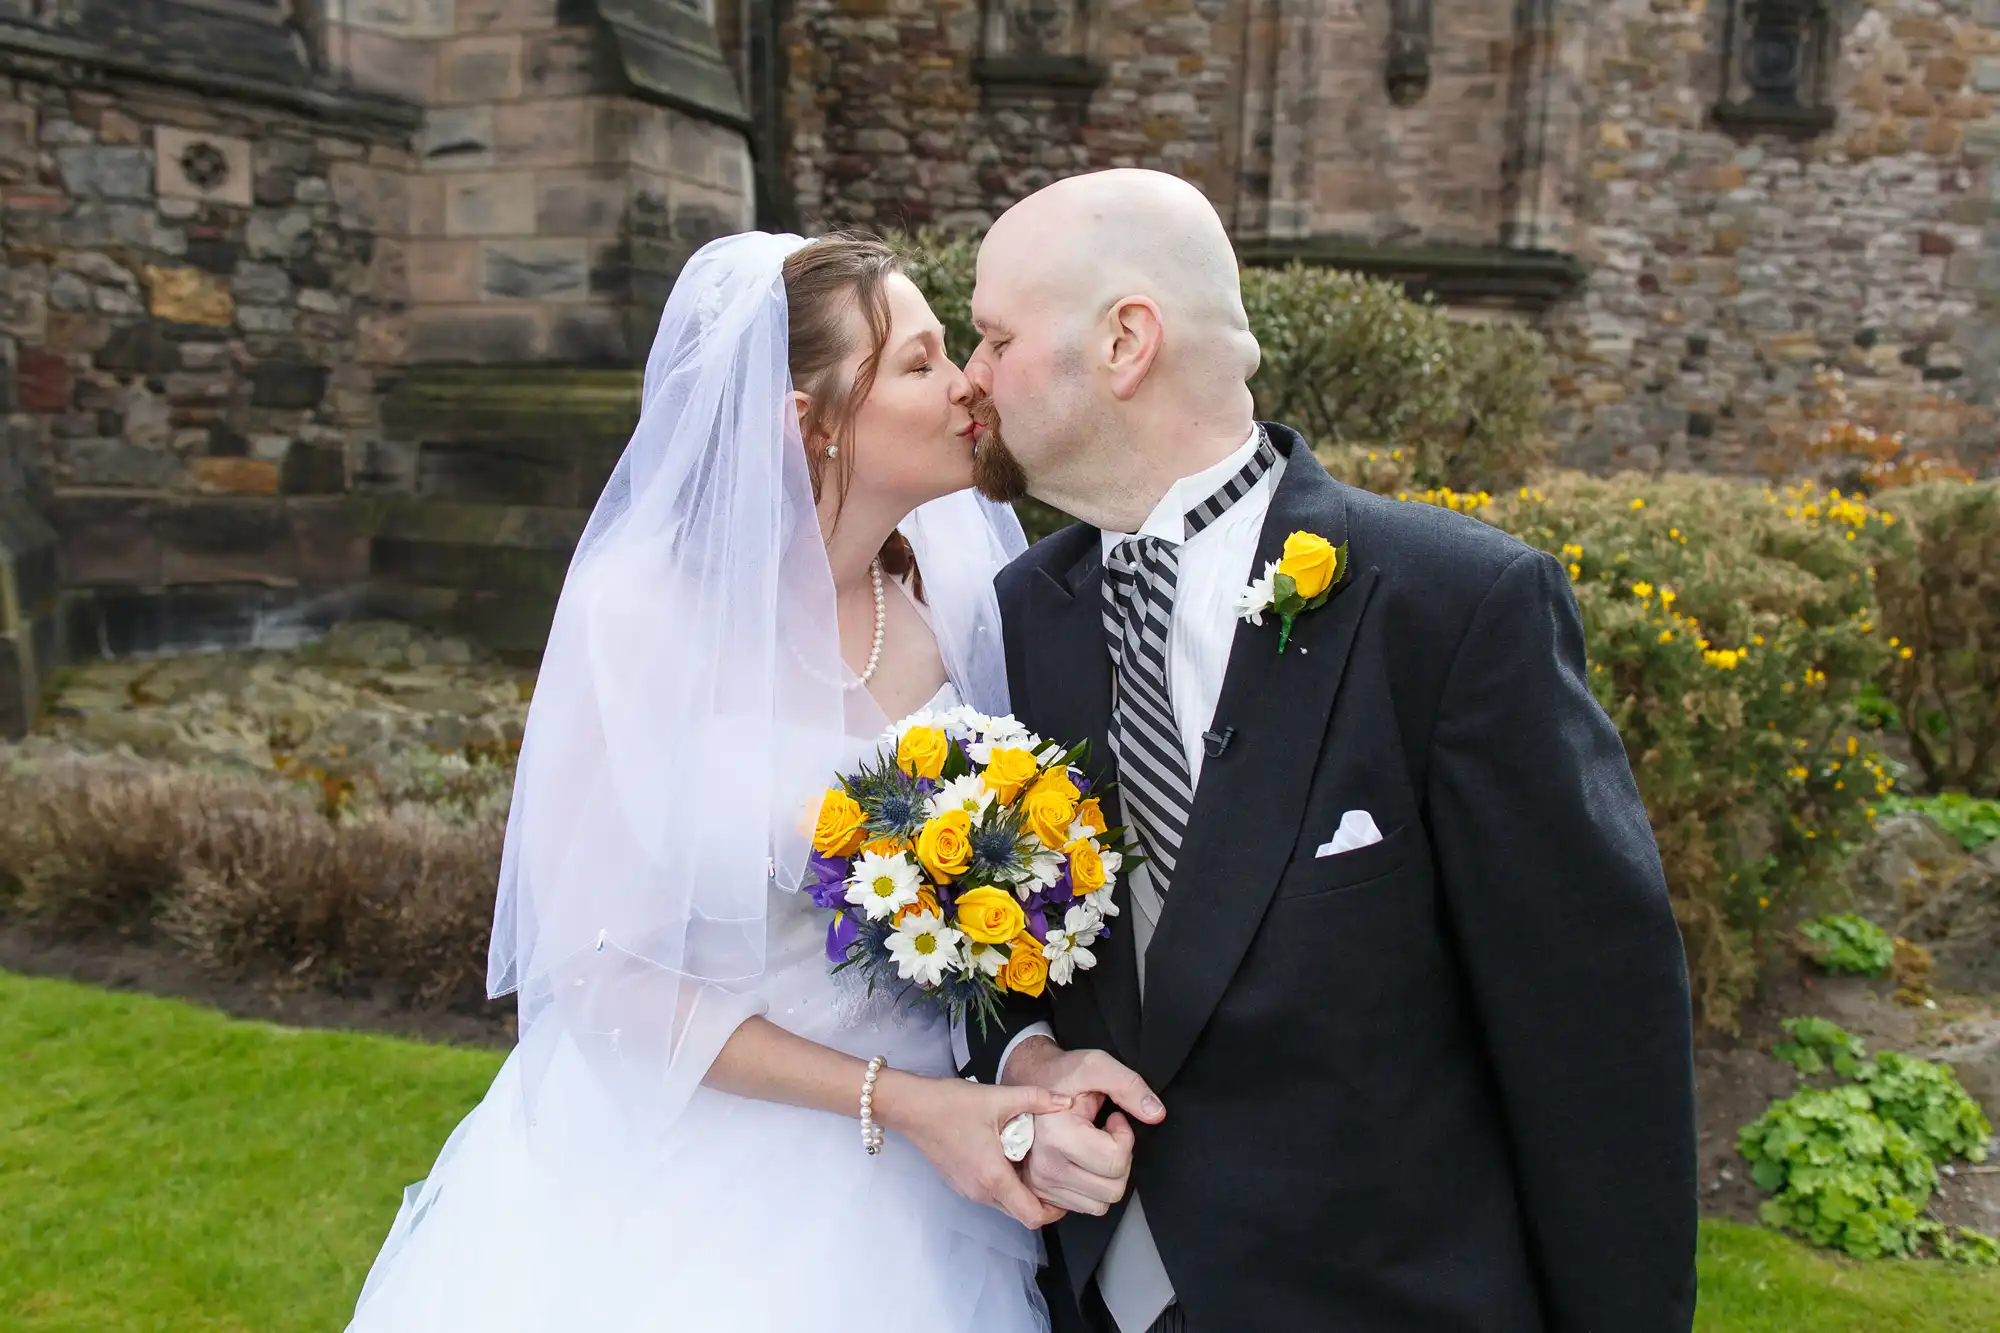 A bride and groom kiss outside a historic stone building, the bride holding a bouquet of yellow and blue flowers.